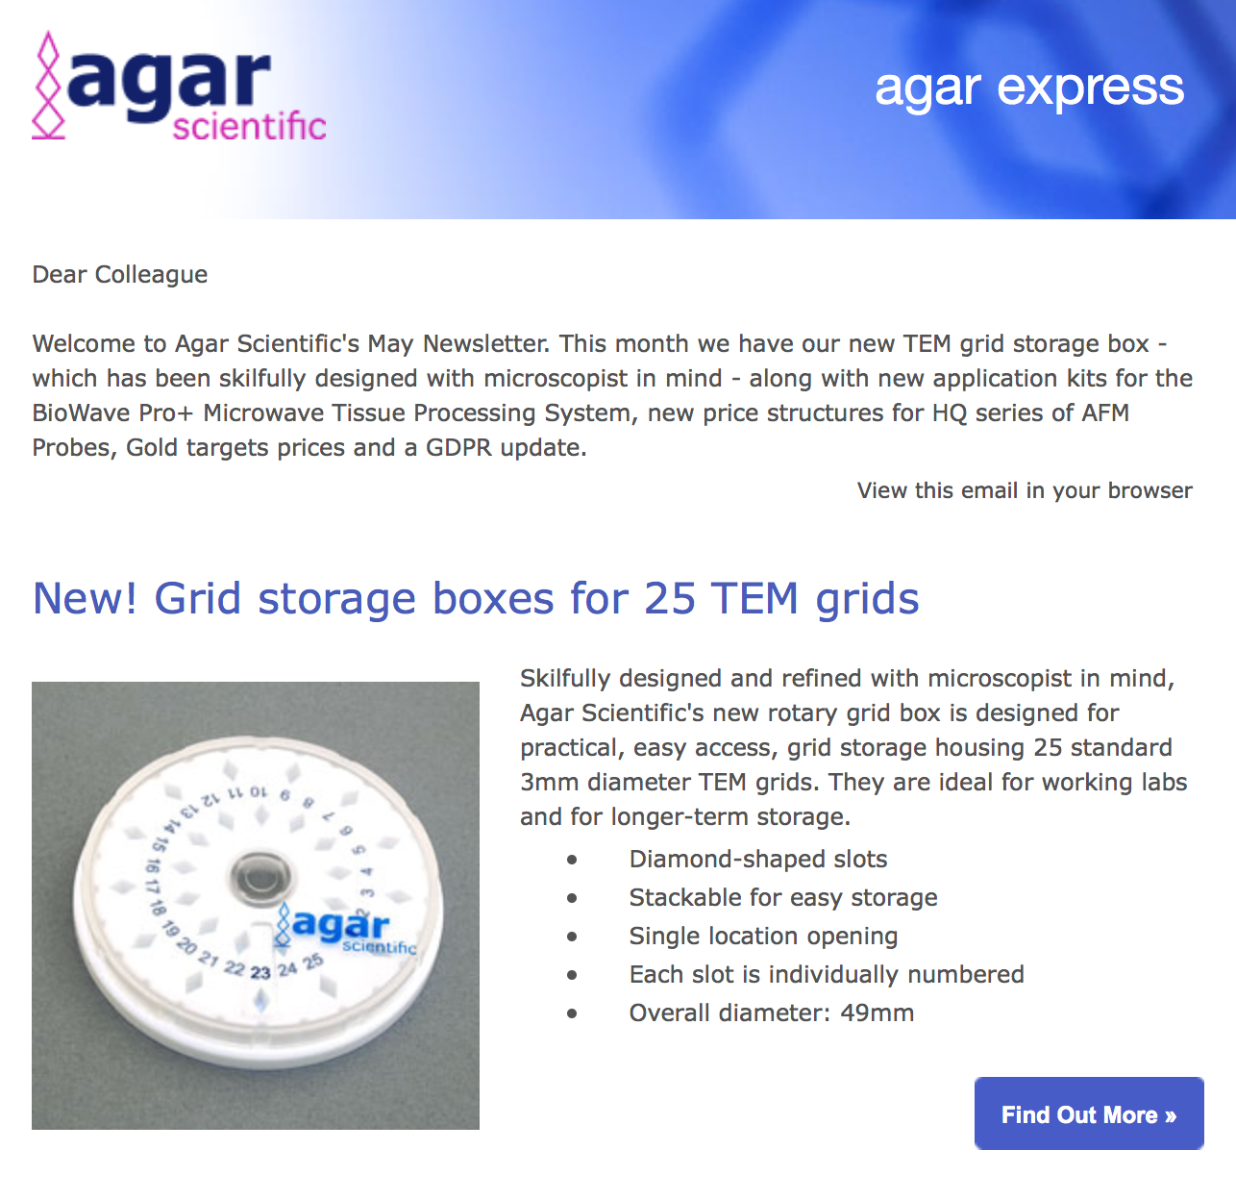 Agar Express May 2018 - introducing our new TEM grid box, new application kits for the BioWave Pro+ Tissue Processing System & more...